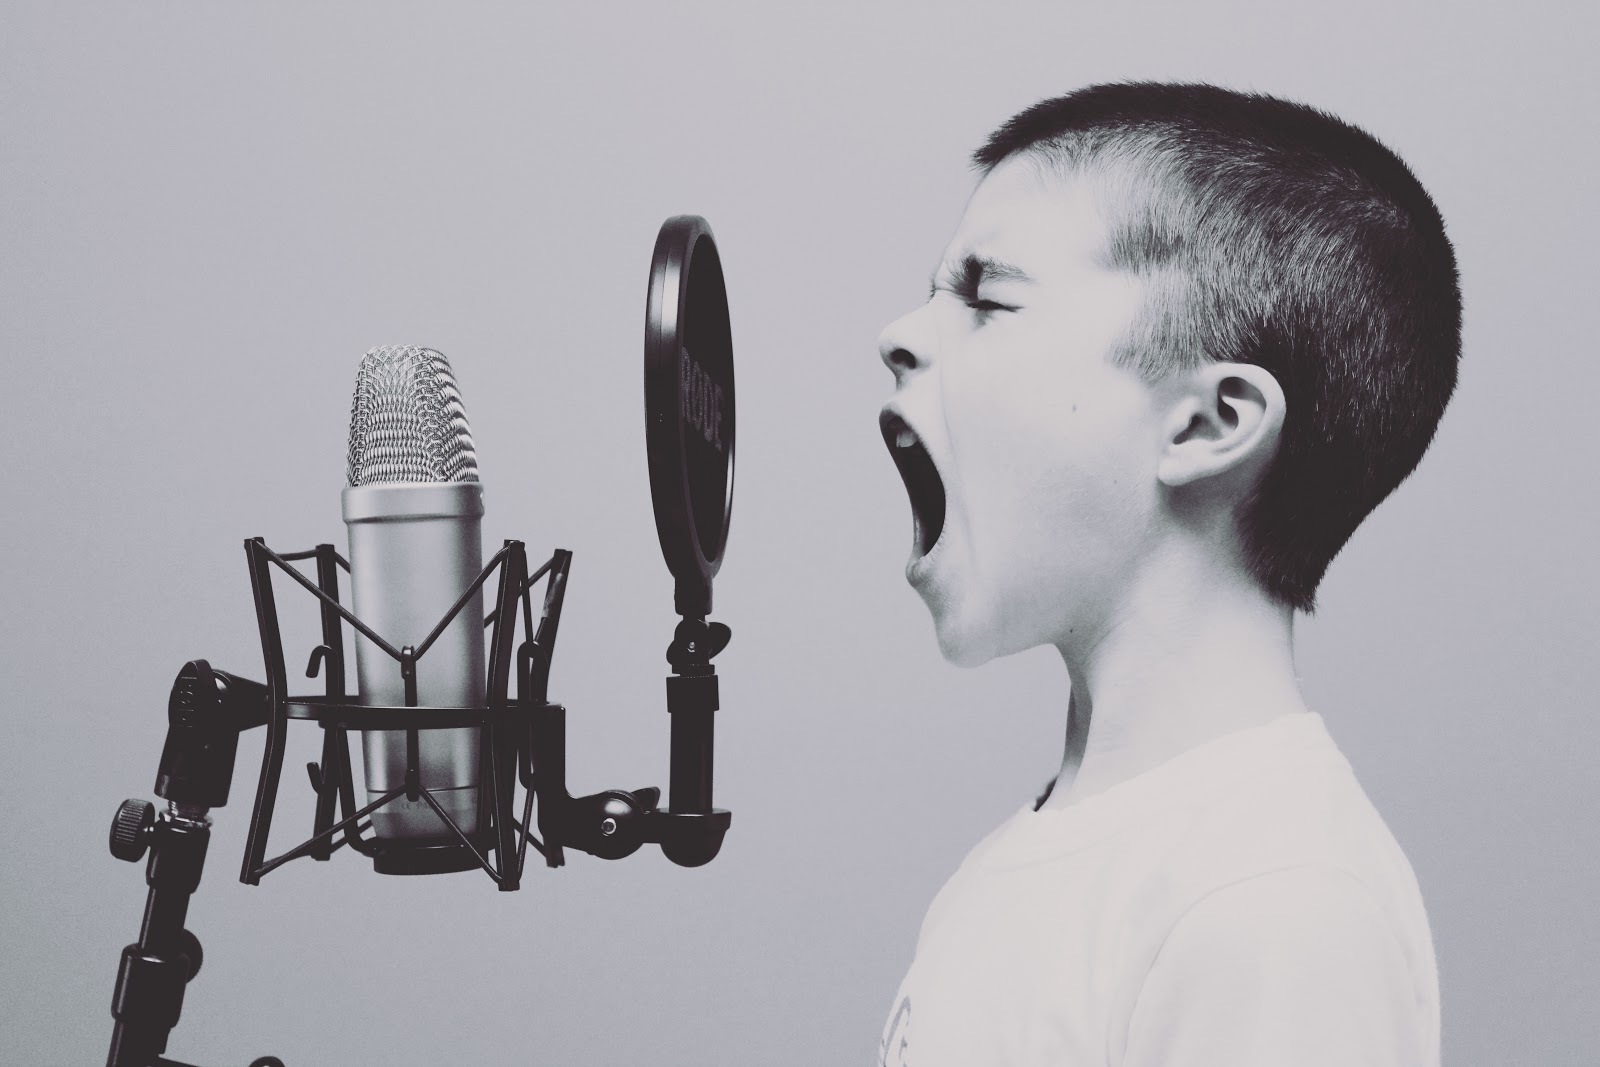 Close up of boy yelling into microphone